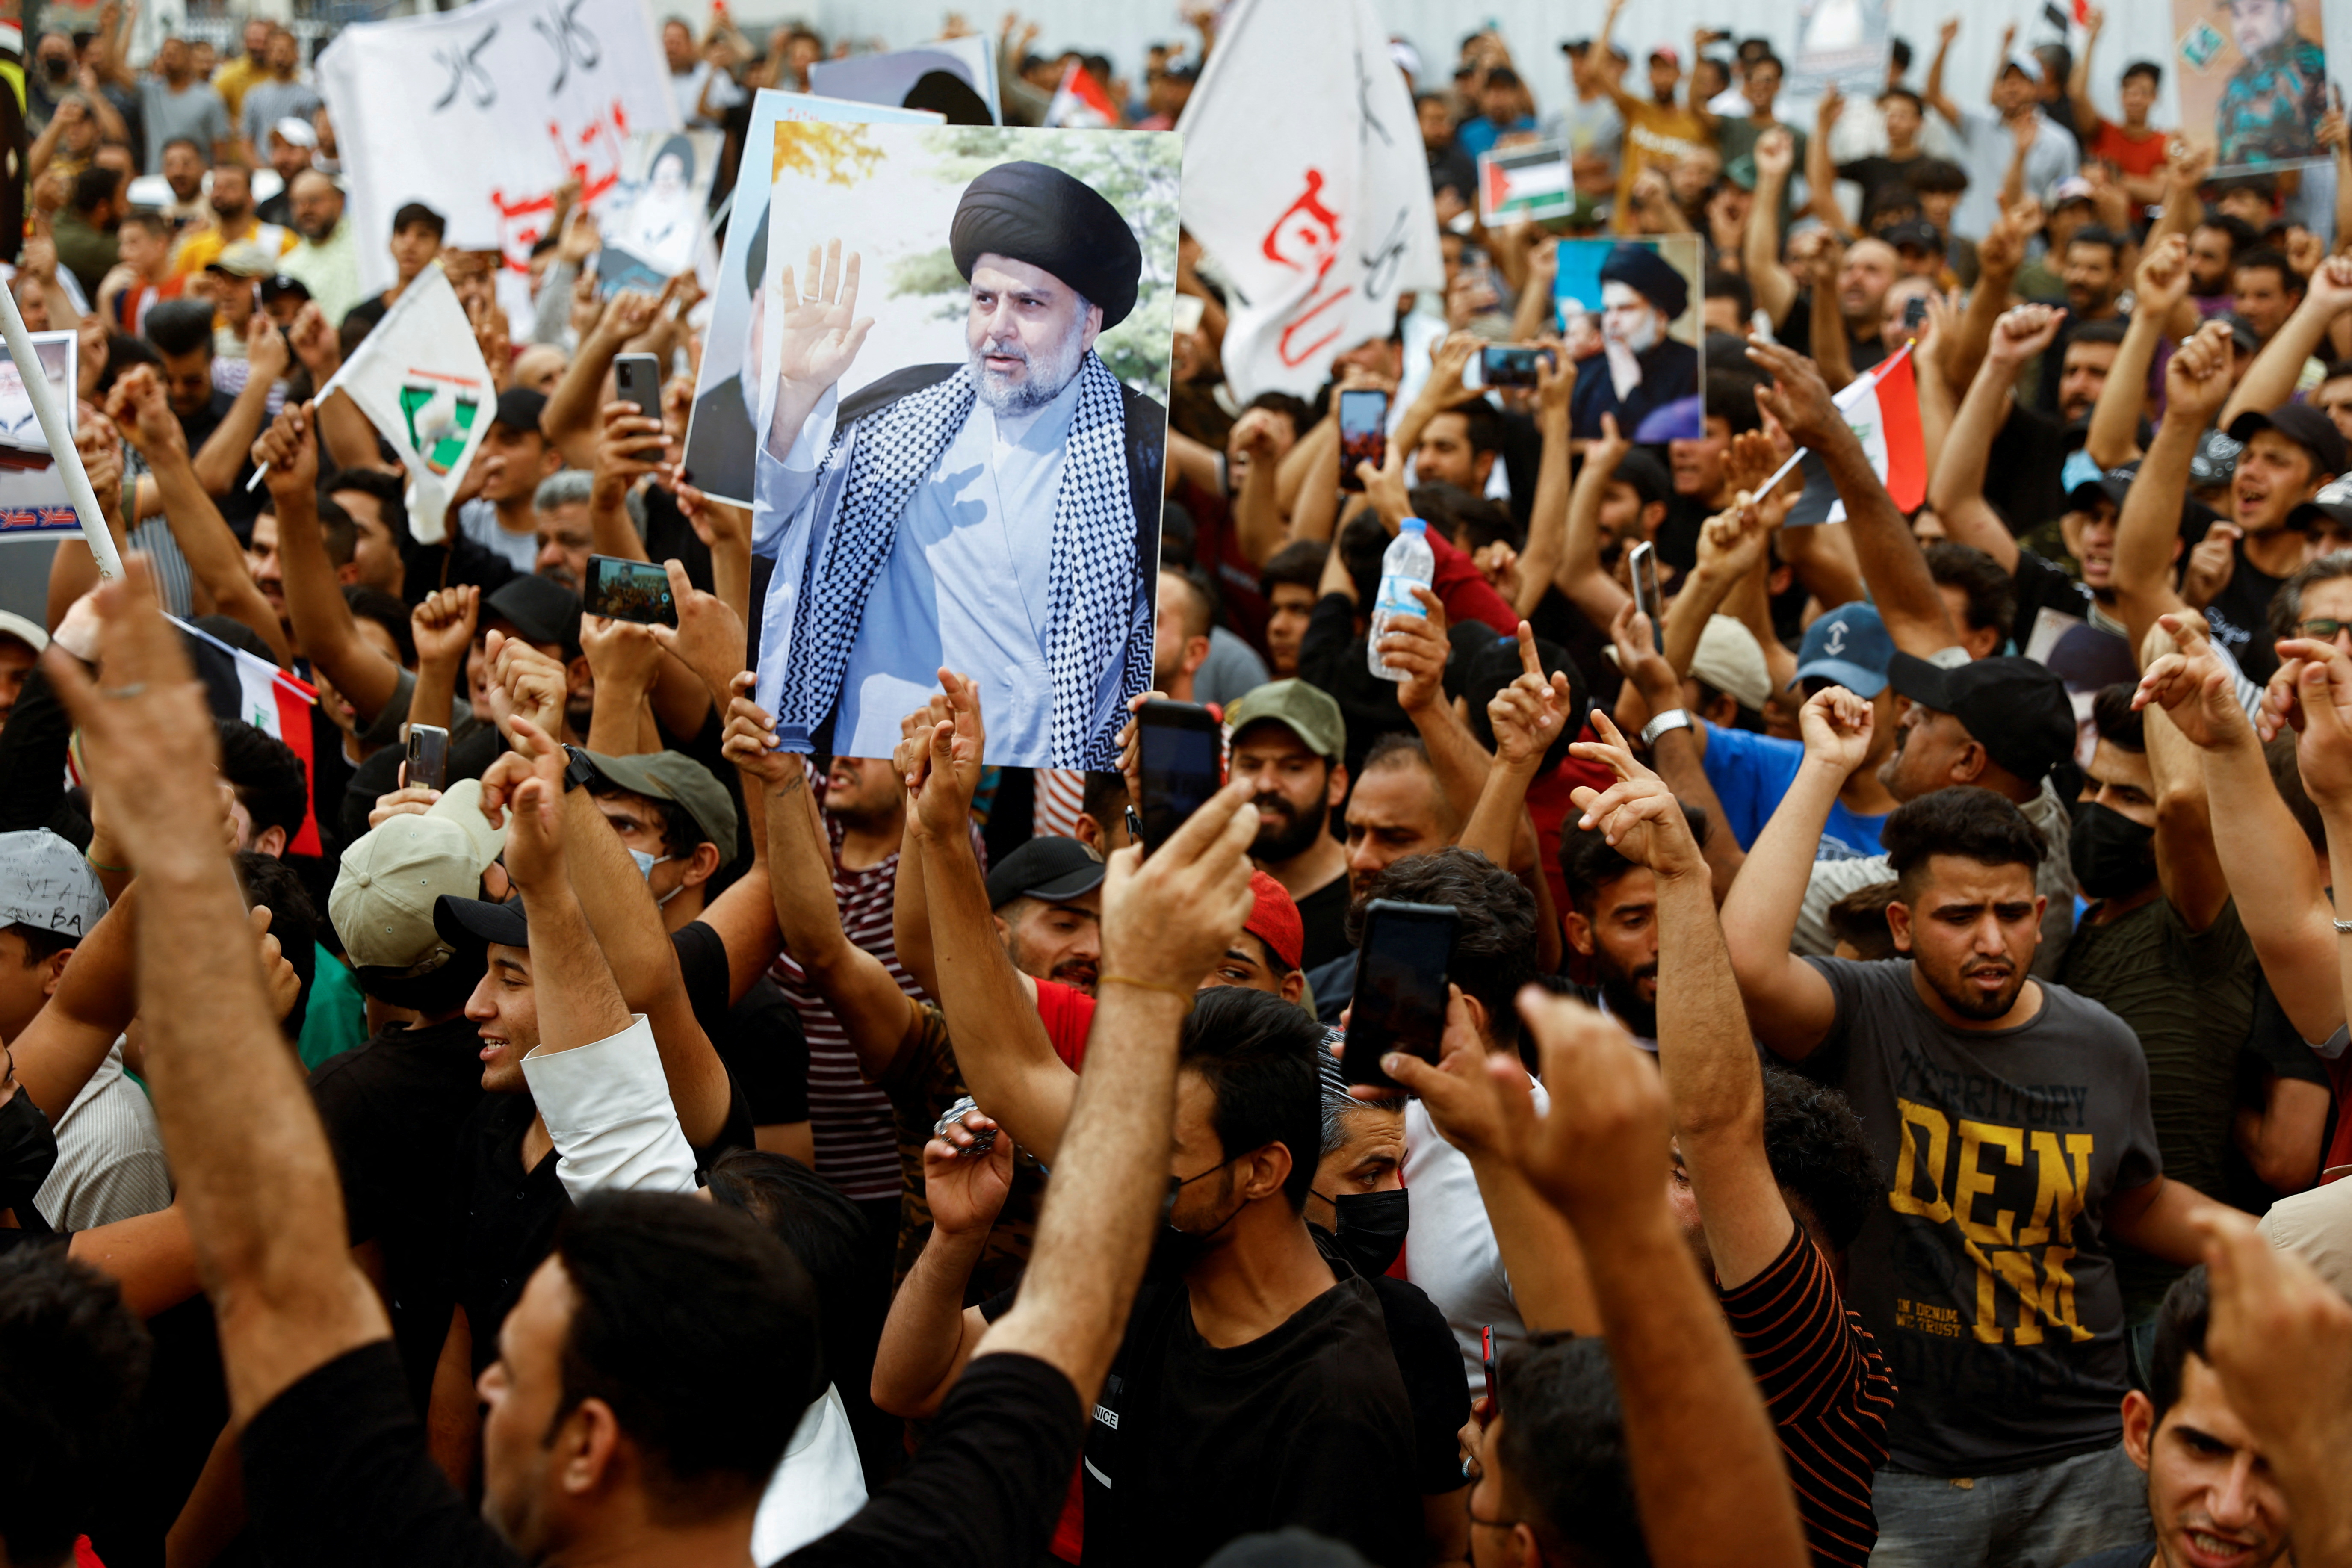 Supporters of Iraqi Shi'ite Muslim cleric Muqtada al-Sadr shout slogans during a celebration after Iraq's parliament passed a law criminalising normalisation of relations with Israel, in Baghdad